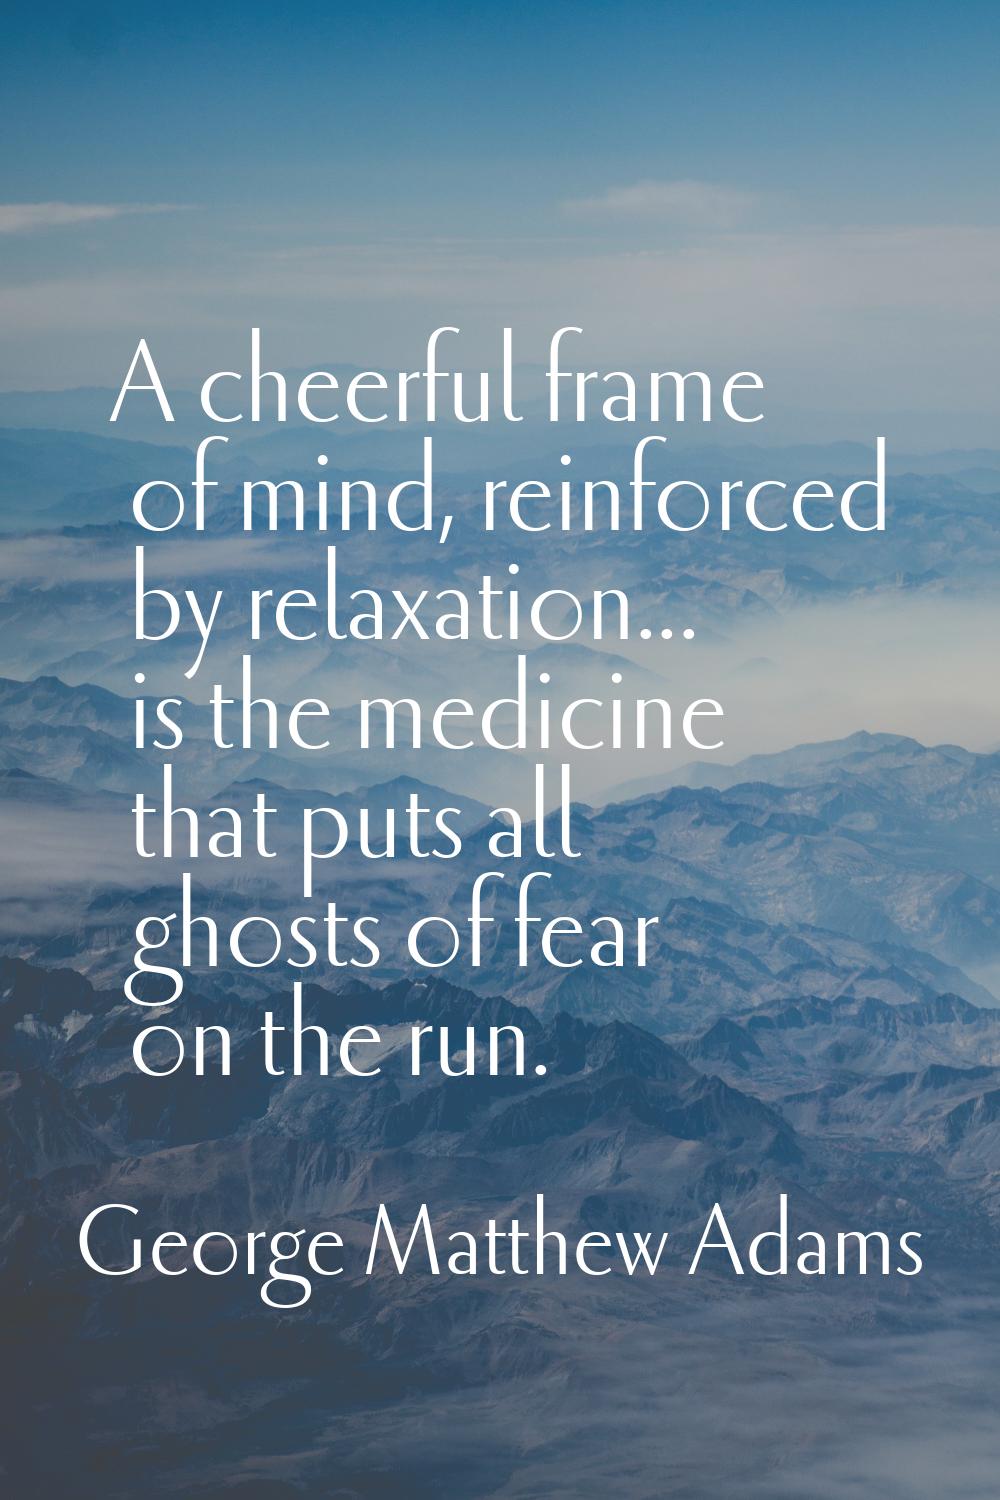 A cheerful frame of mind, reinforced by relaxation... is the medicine that puts all ghosts of fear 